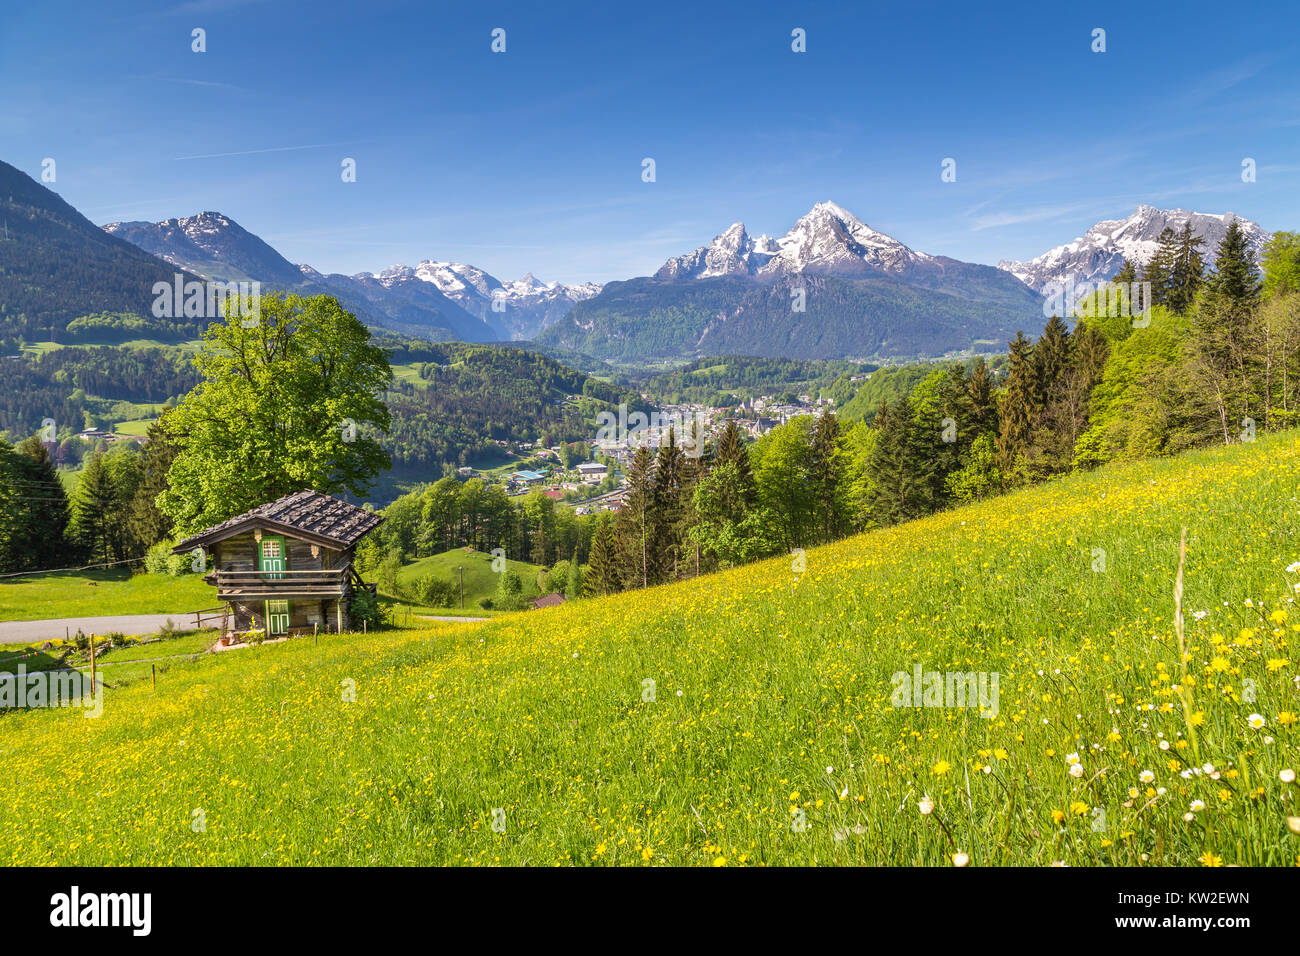 Scenic view of idyllic mountain scenery in the Alps with traditional mountain chalet and fresh green mountain pastures with blooming flowers on a sunn Stock Photo